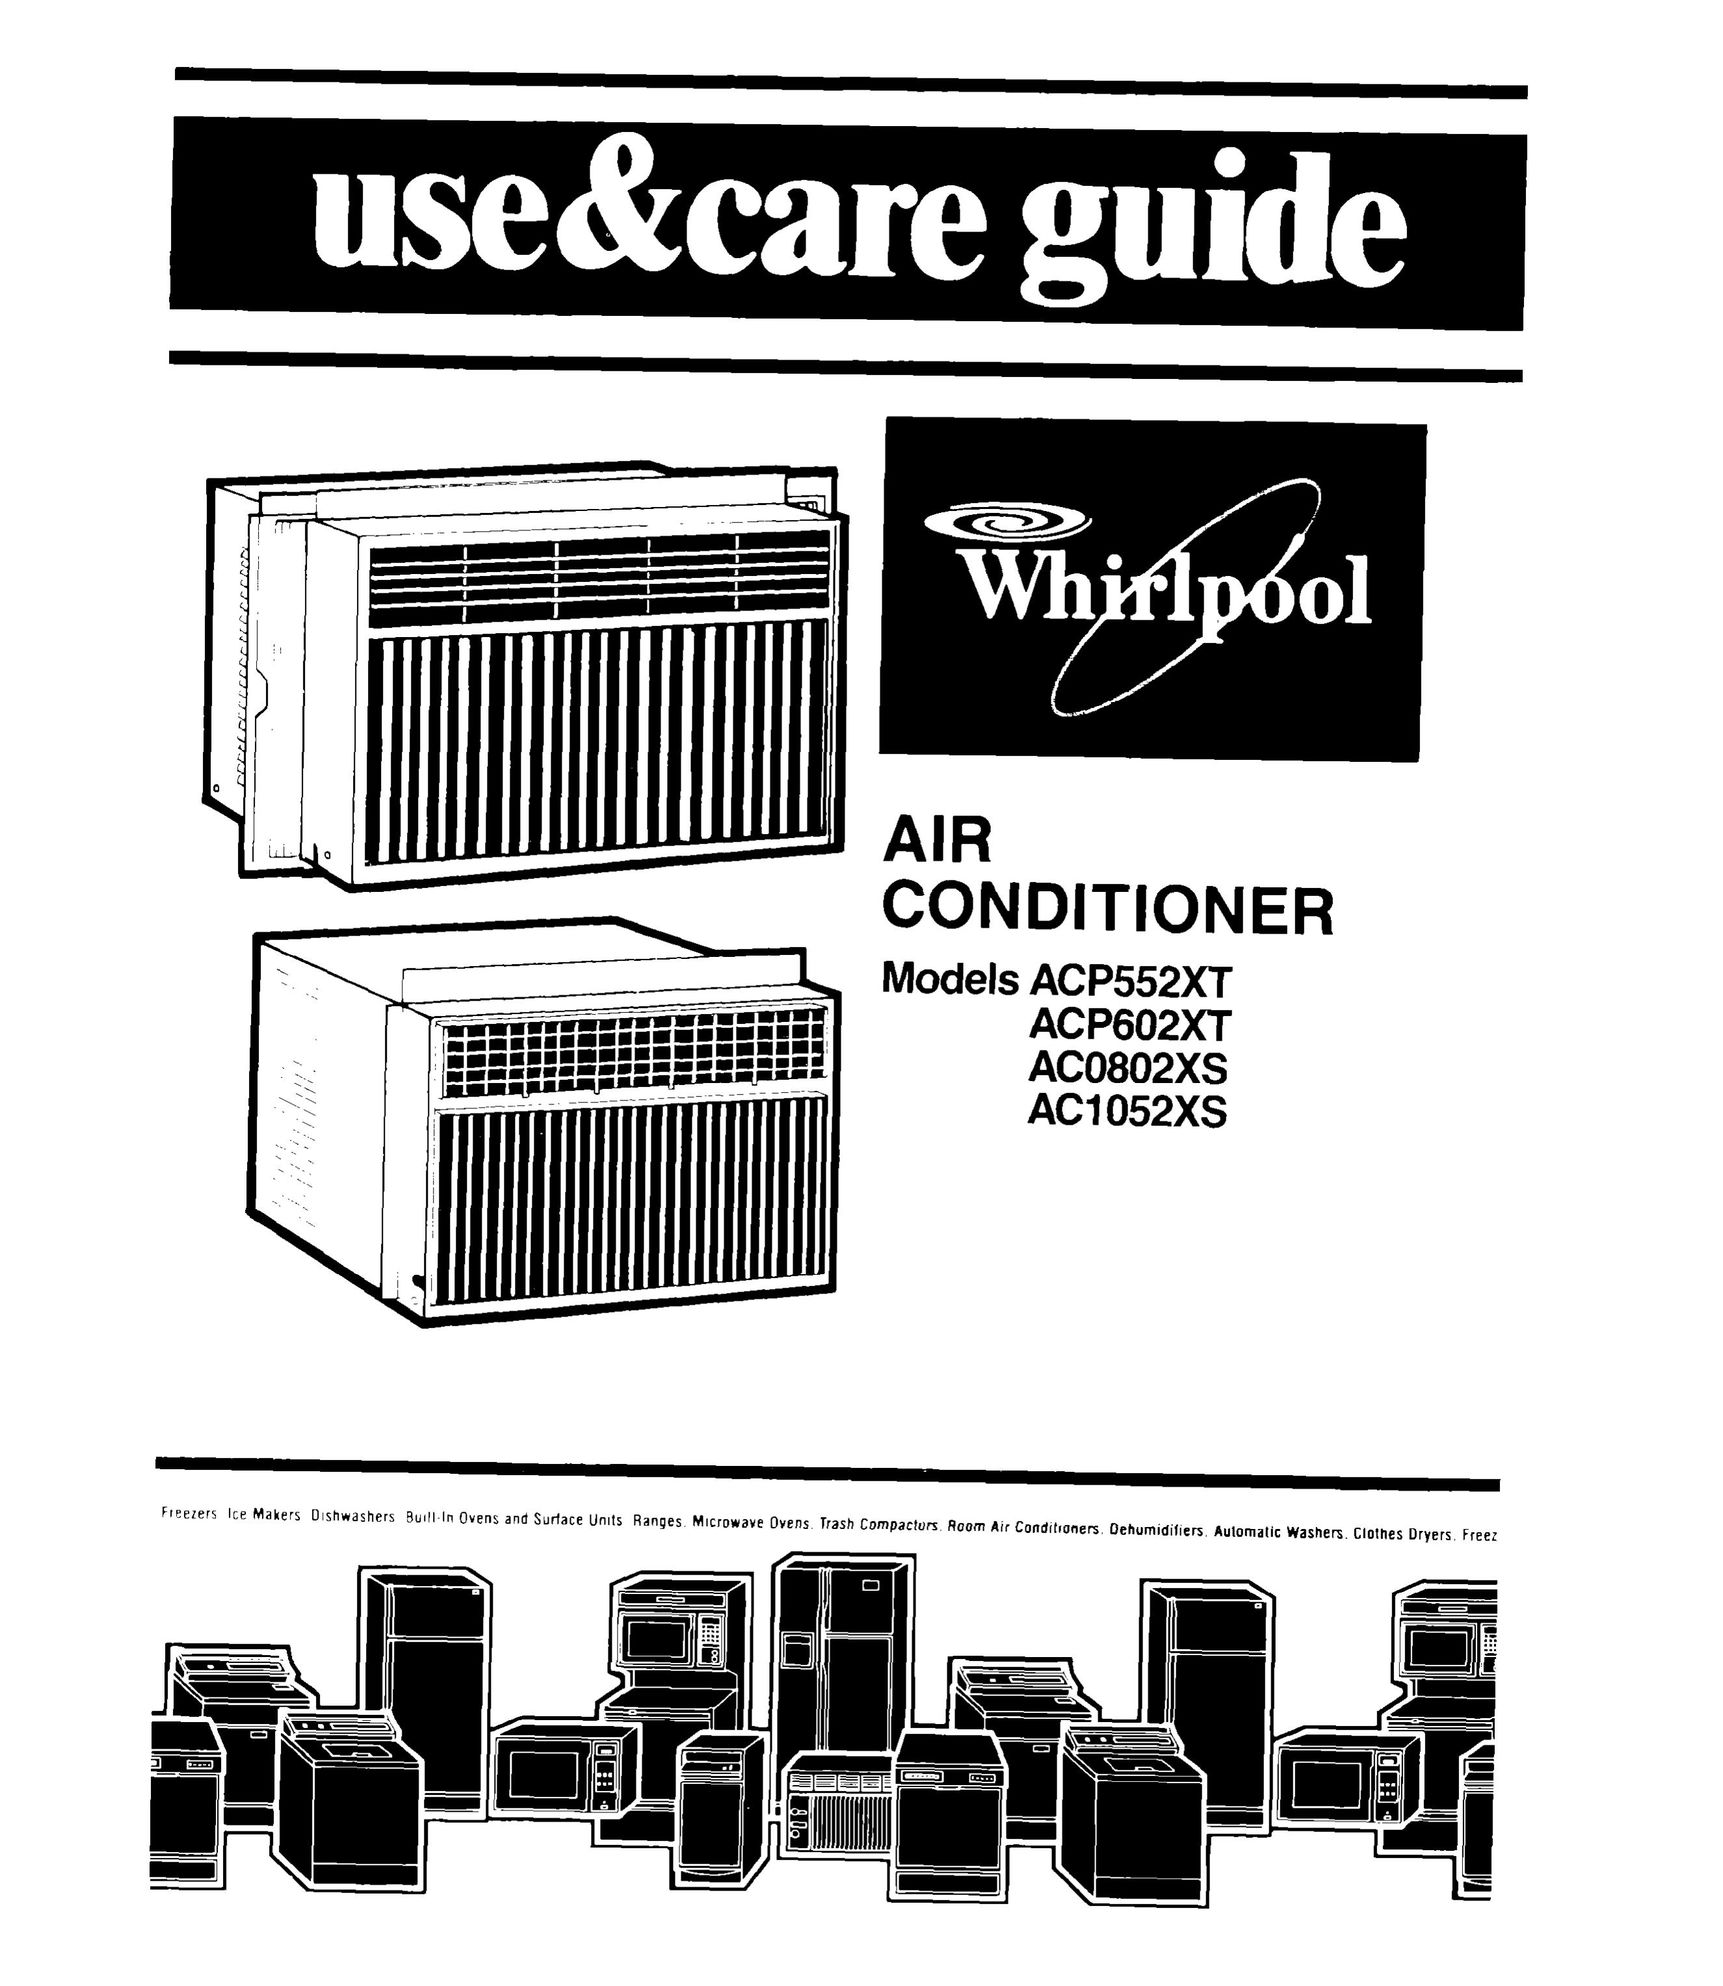 Whirlpool AC1052XS Air Conditioner User Manual